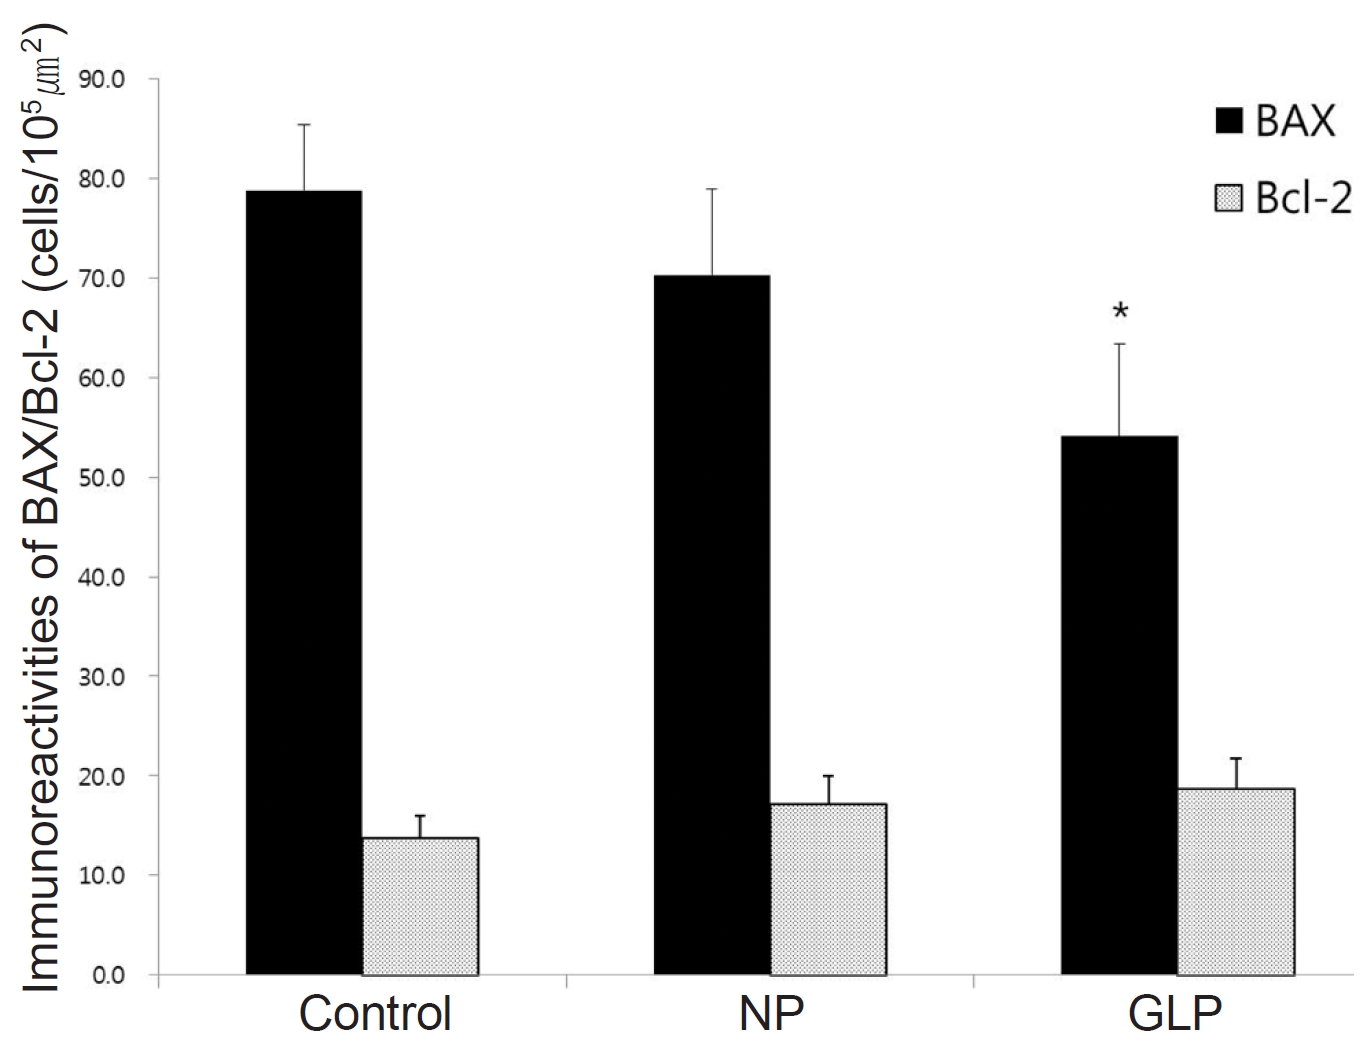 Immunoreactivities of BAX/Bcl-2 proteins in EtOH/HCl-induced
acute gastric ulcers in rats. Mean ± S.E. *P < 0.05 vs. Control; NP,
injection of saline; GLP, injection of Ganoderma lucidum pharmacopuncture.